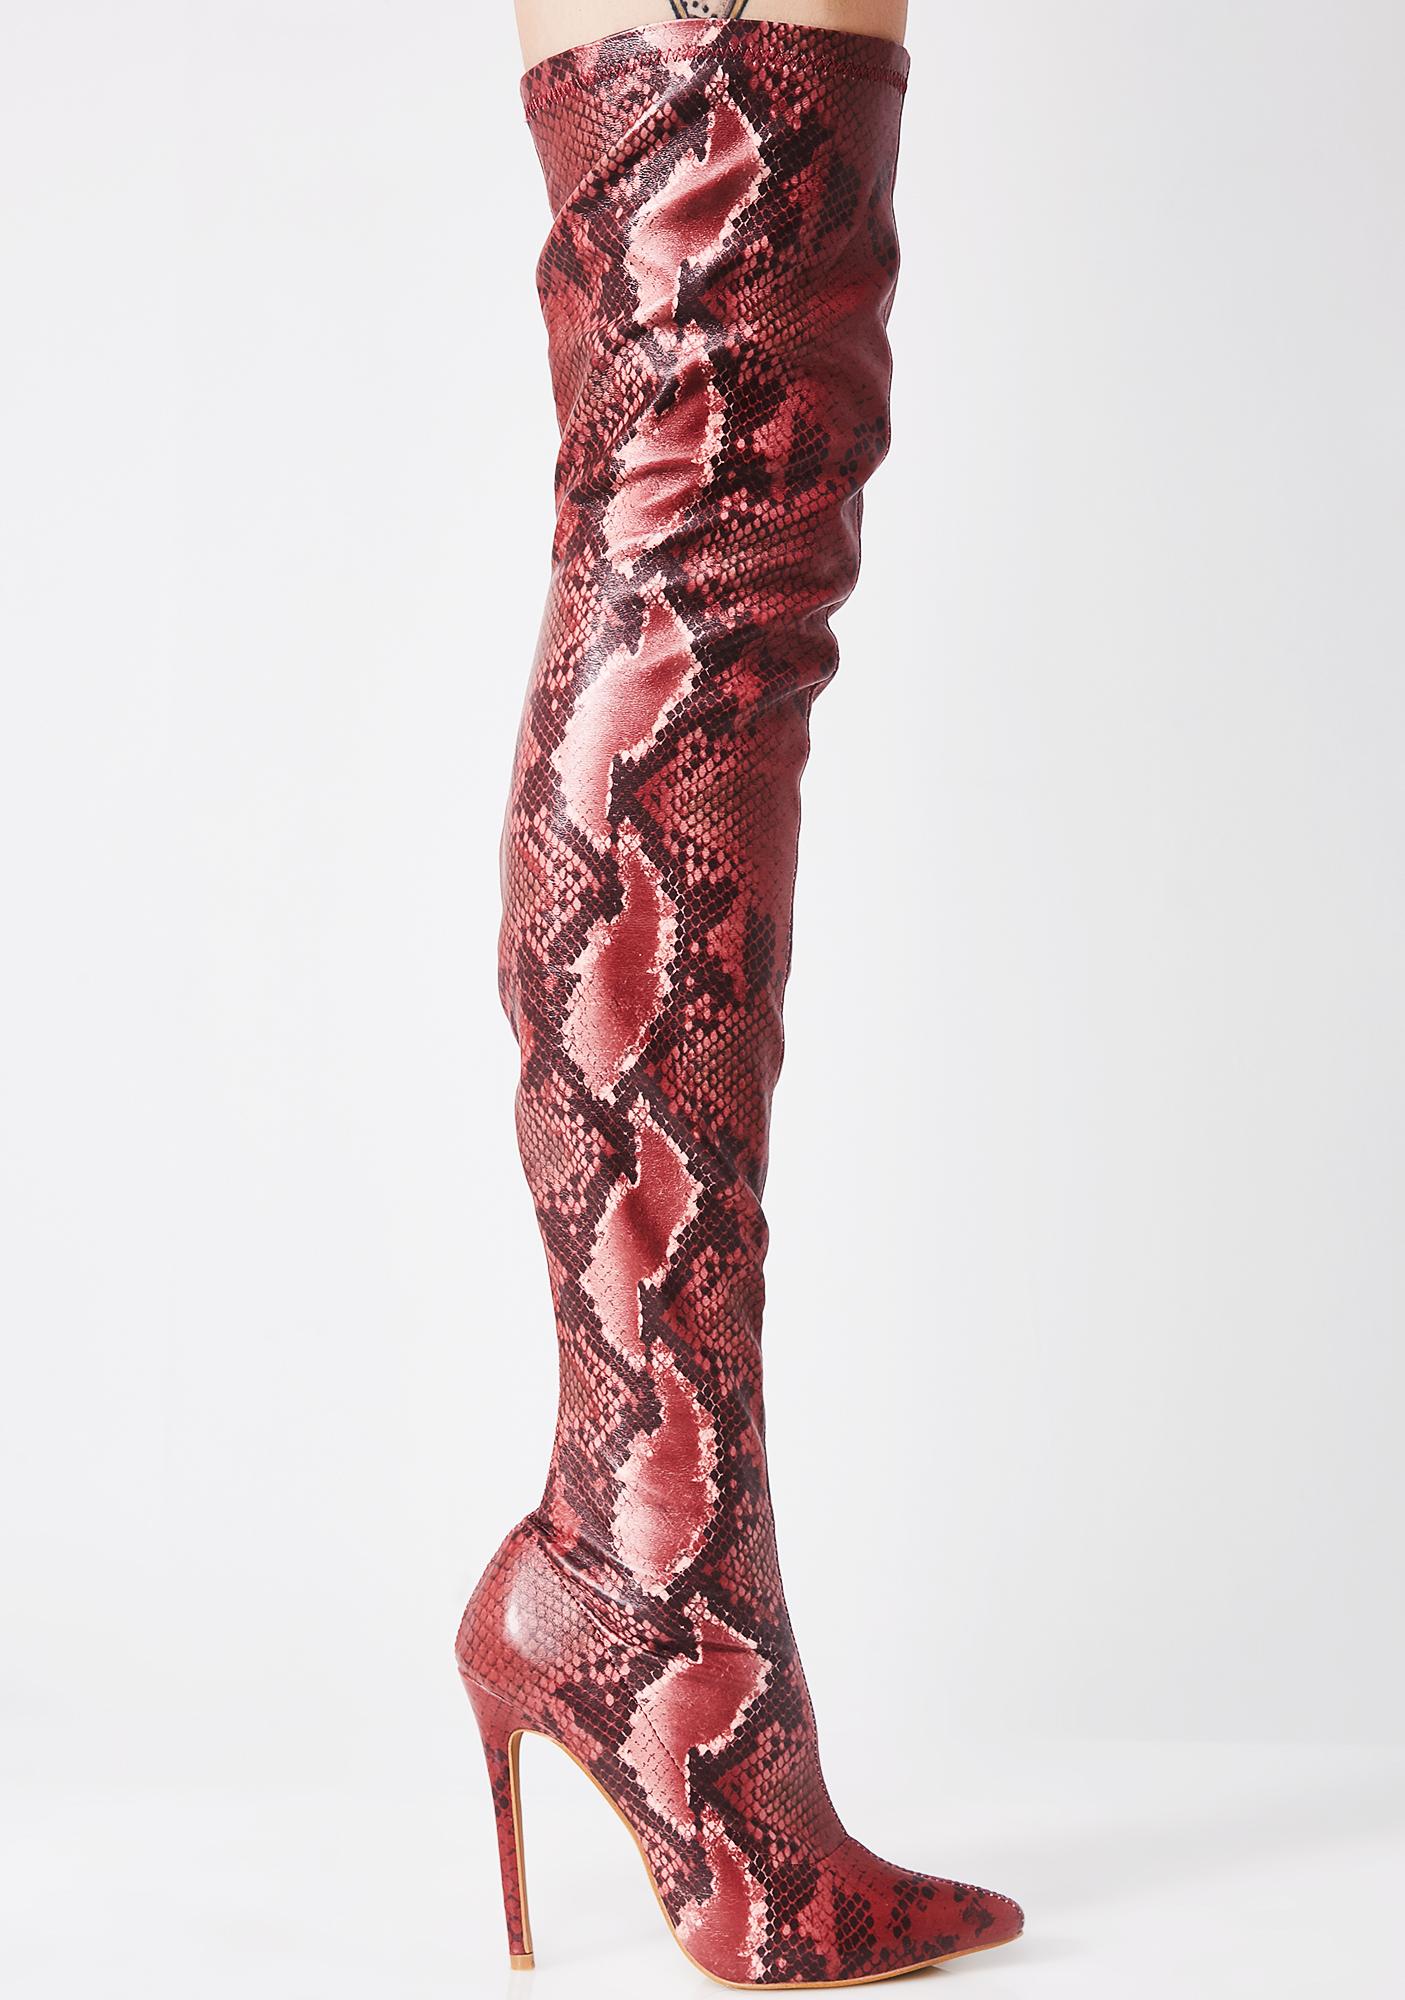 Snakeskin Printed Over The Knee Boots 